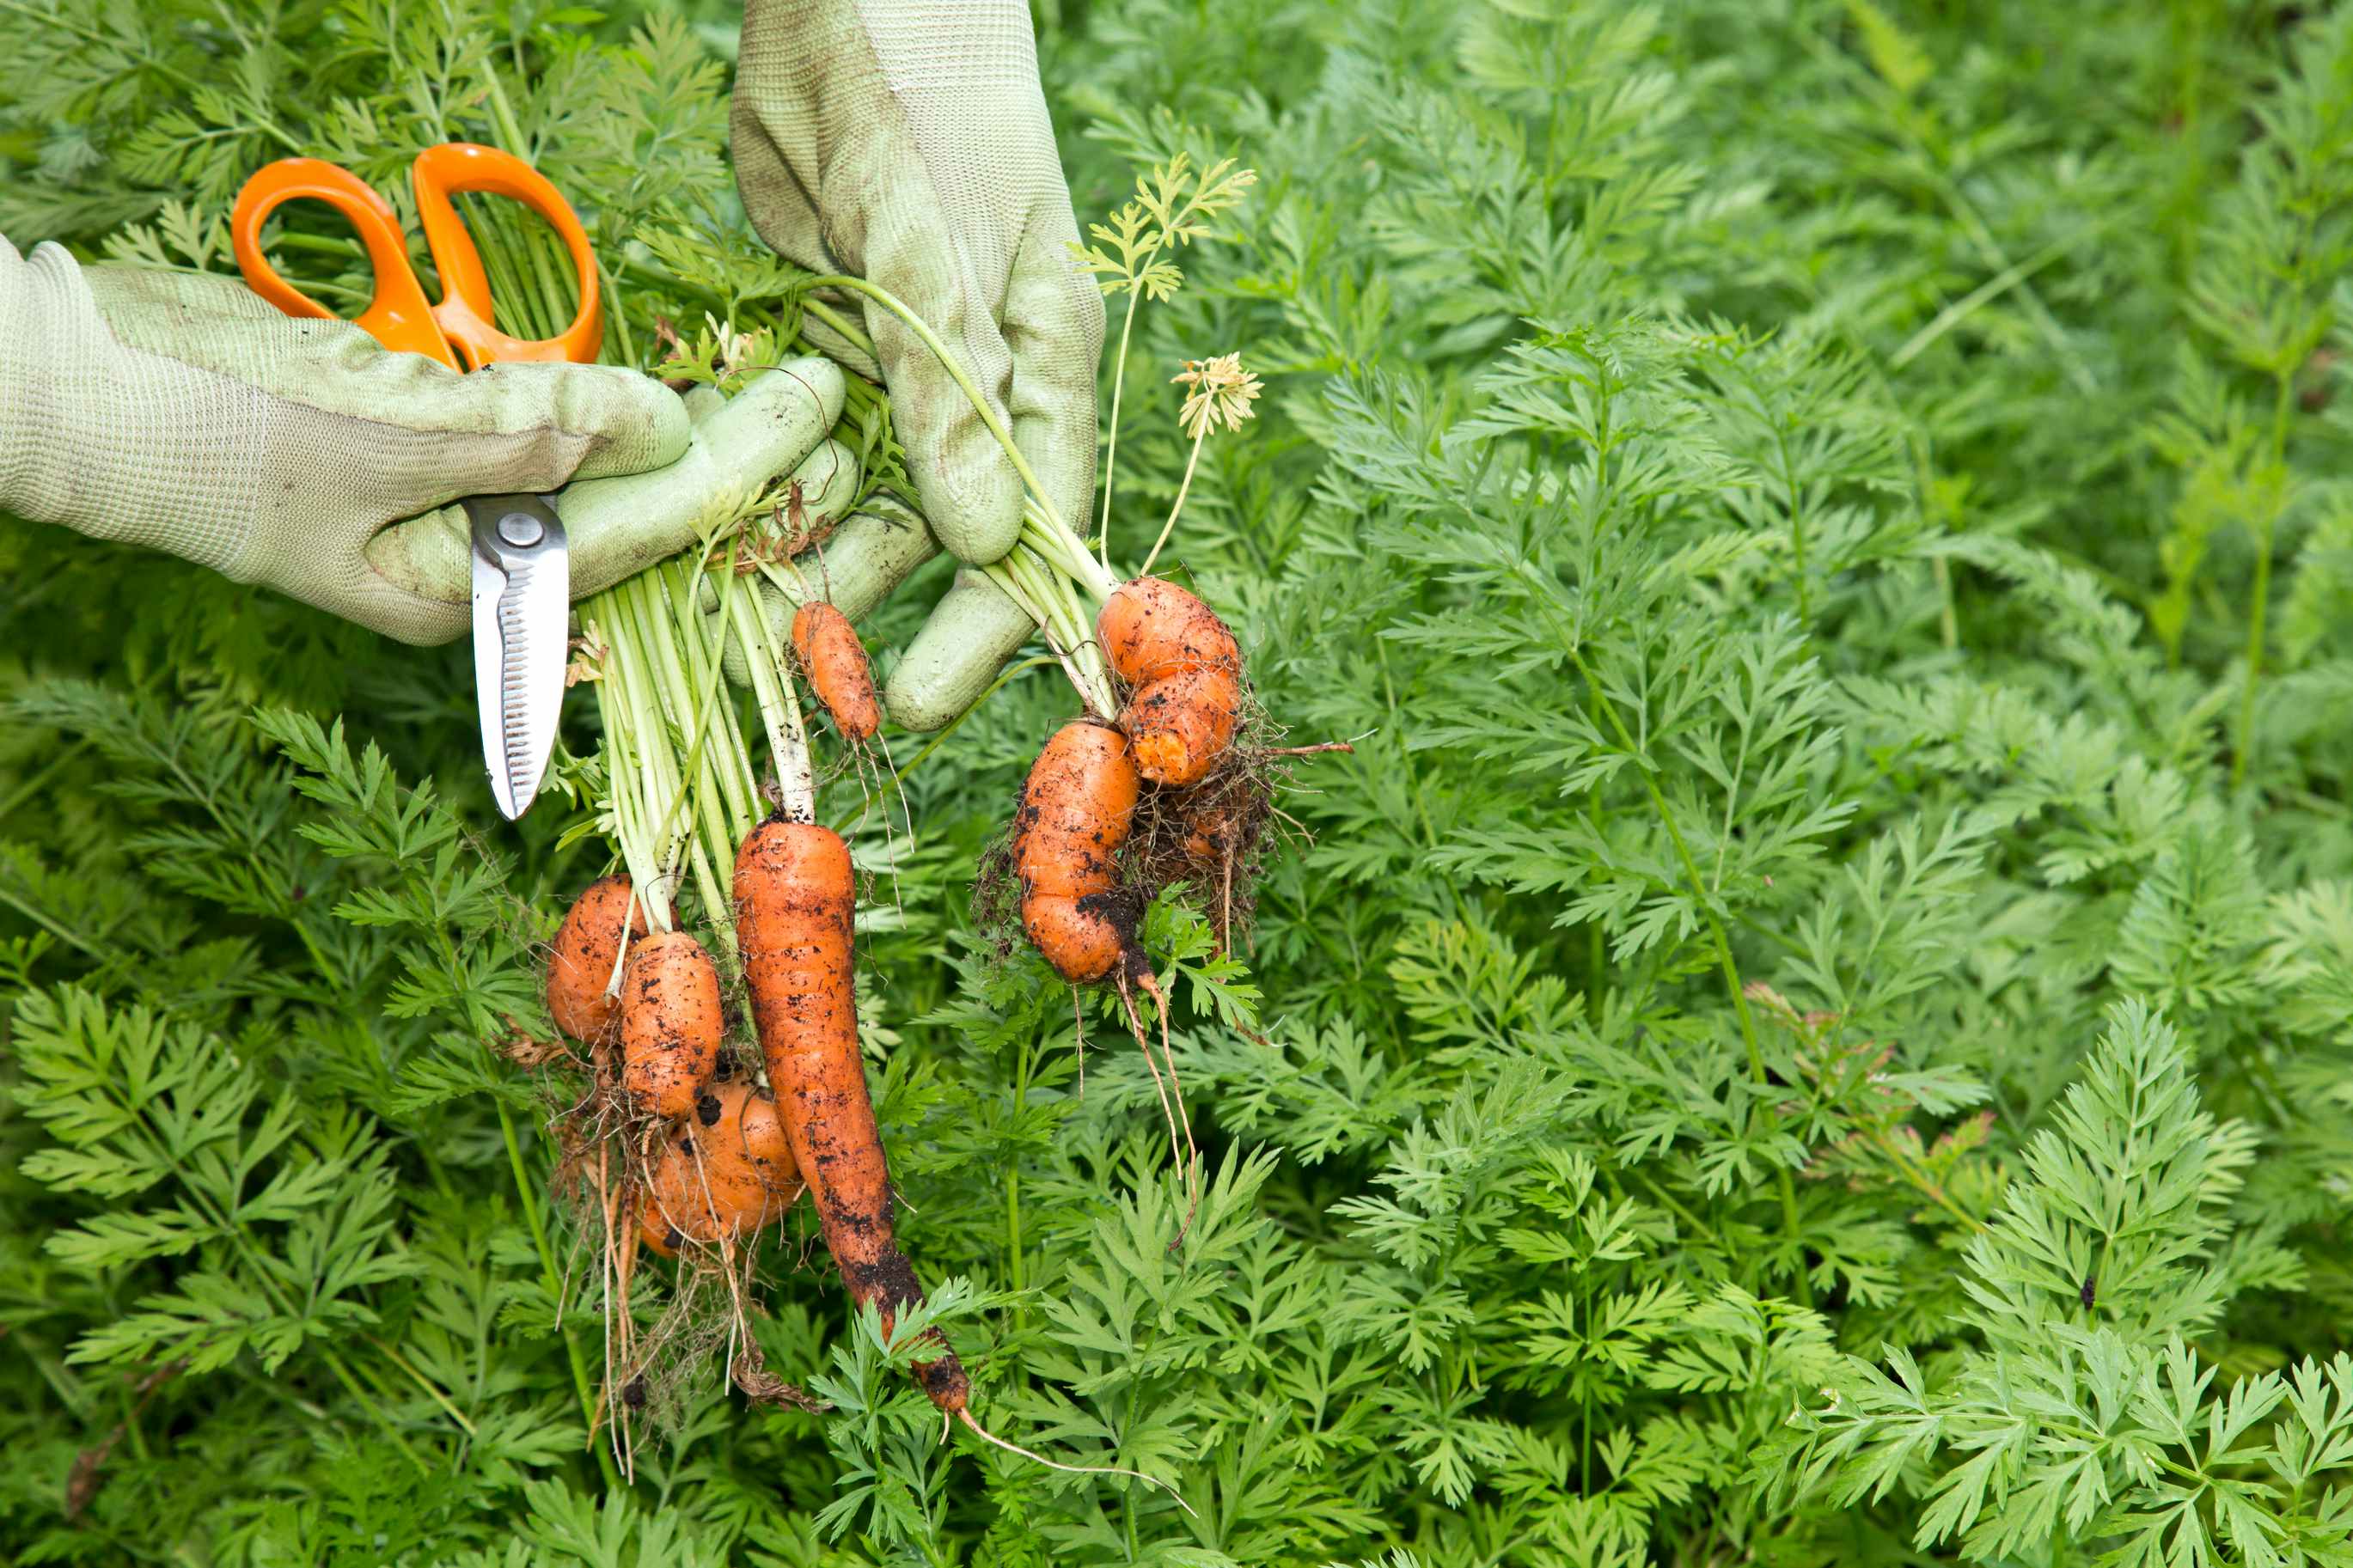 hand with gloves on picking carrots from a garden while holding scissors